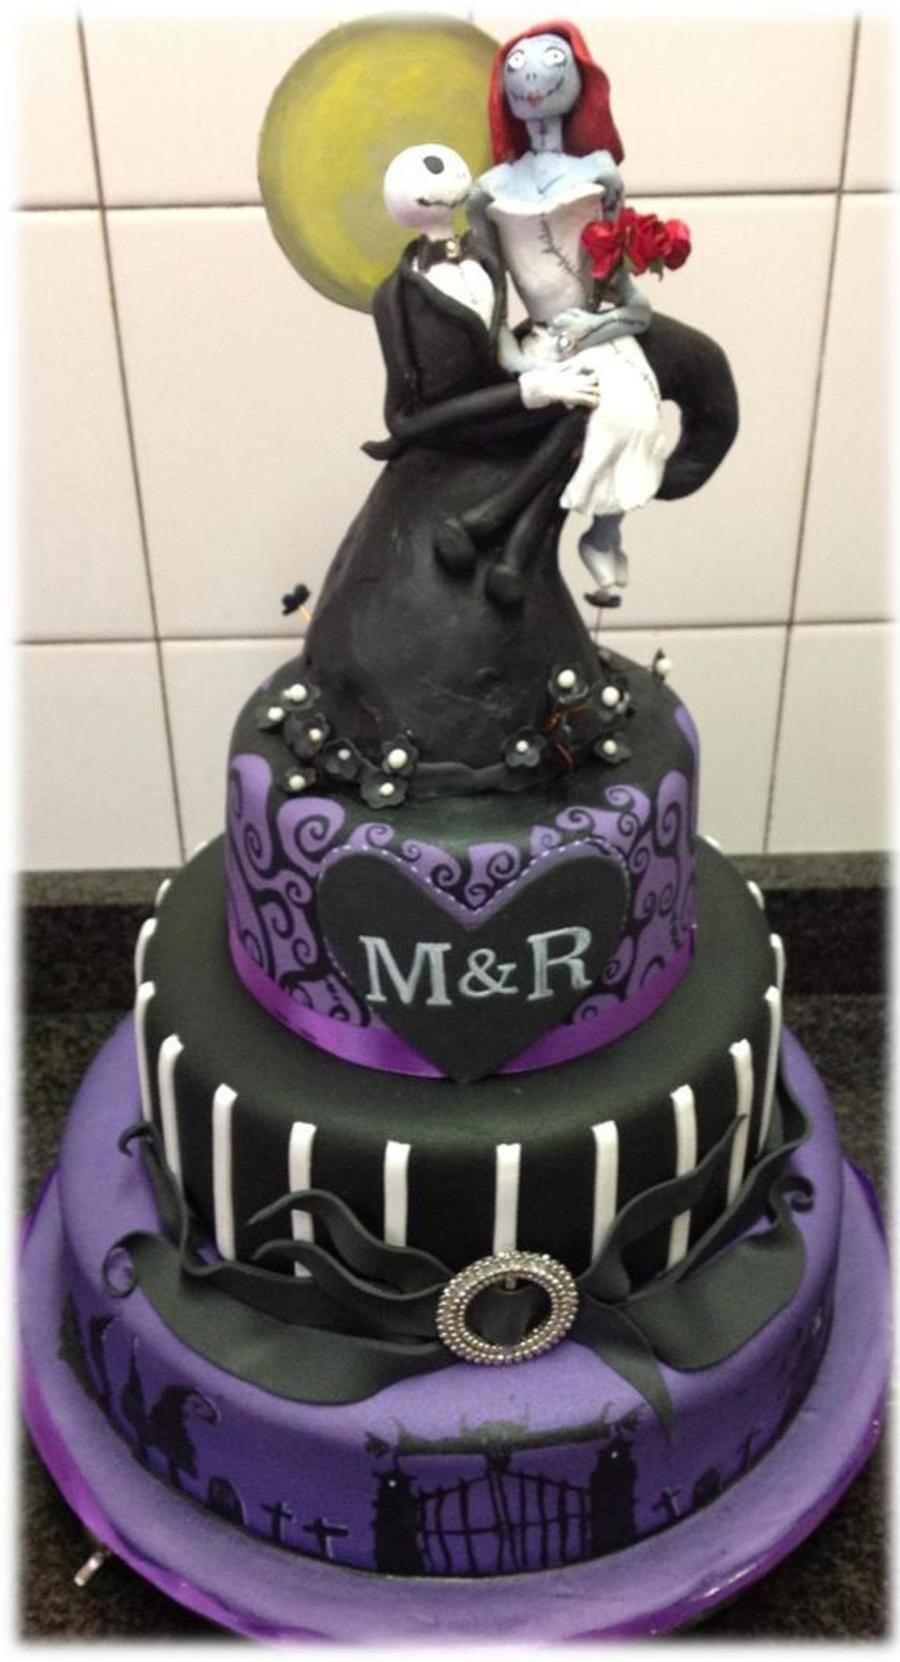 Nightmare Before Christmas Wedding Cake
 This Was A Wedding Cake For A Couple Who Wanted A